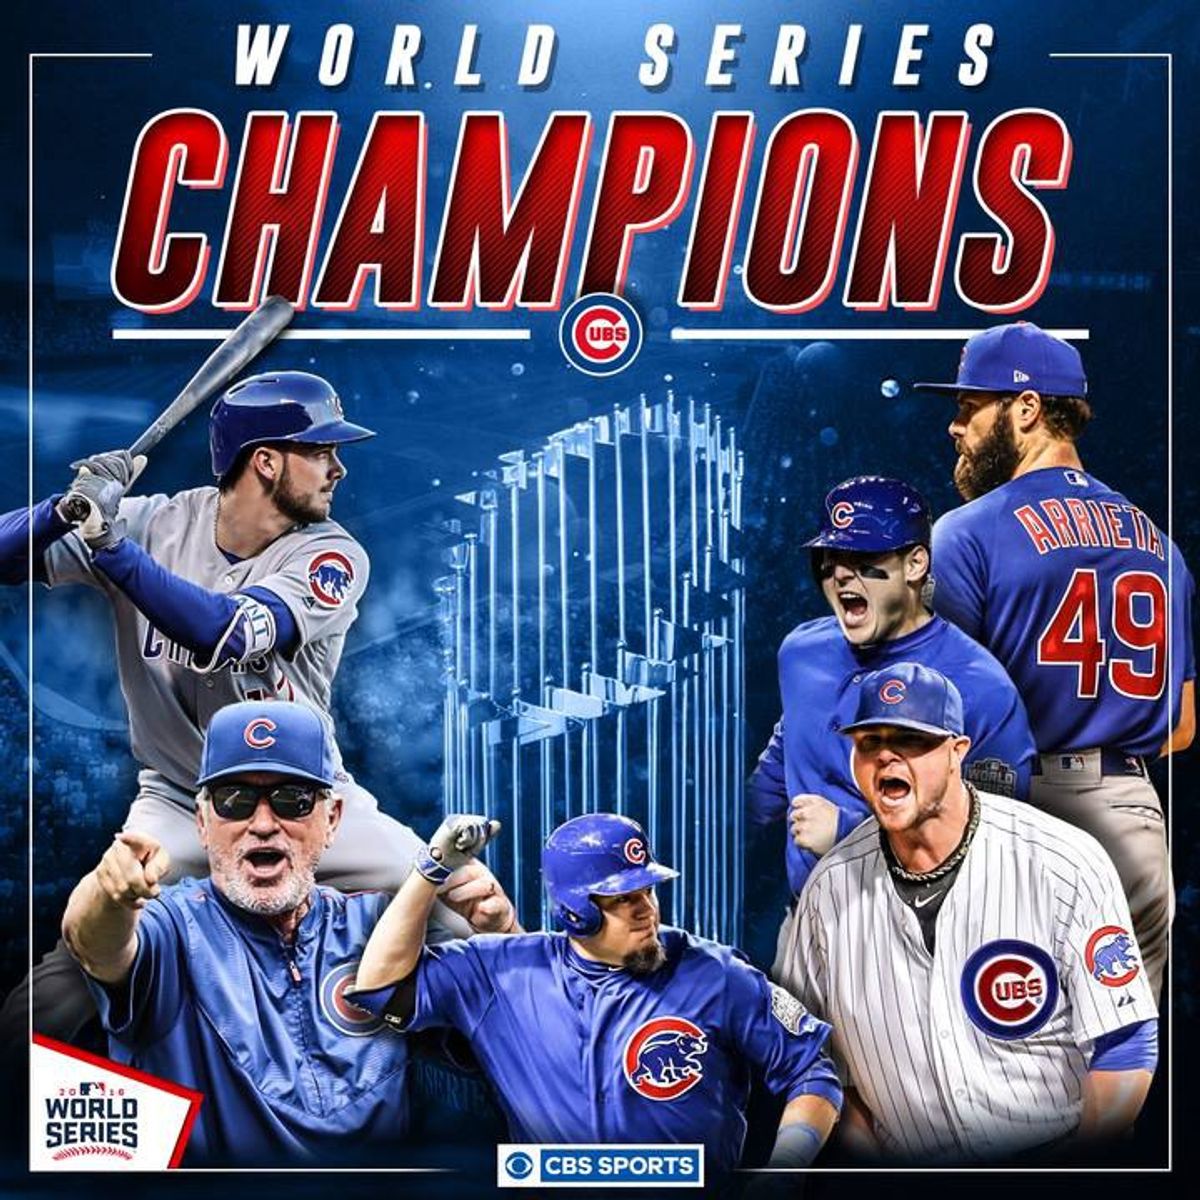 108 Years In The Making: The Chicago Cubs' Journey Back To The Top